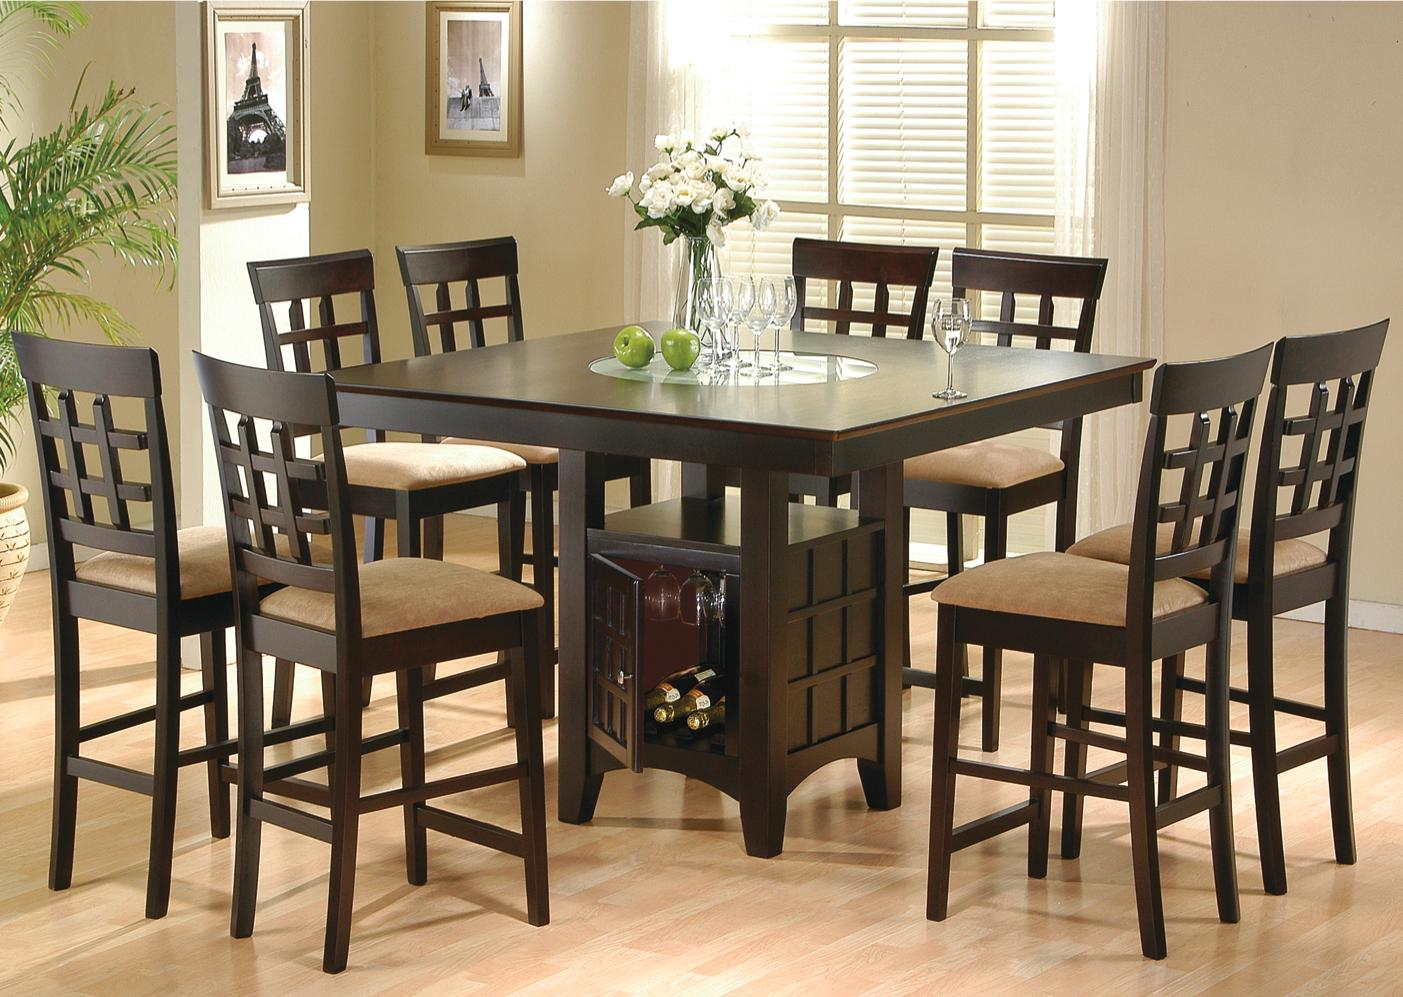 Mix Match 9 Piece Counter Height Dining Set pertaining to dimensions 1403 X 997